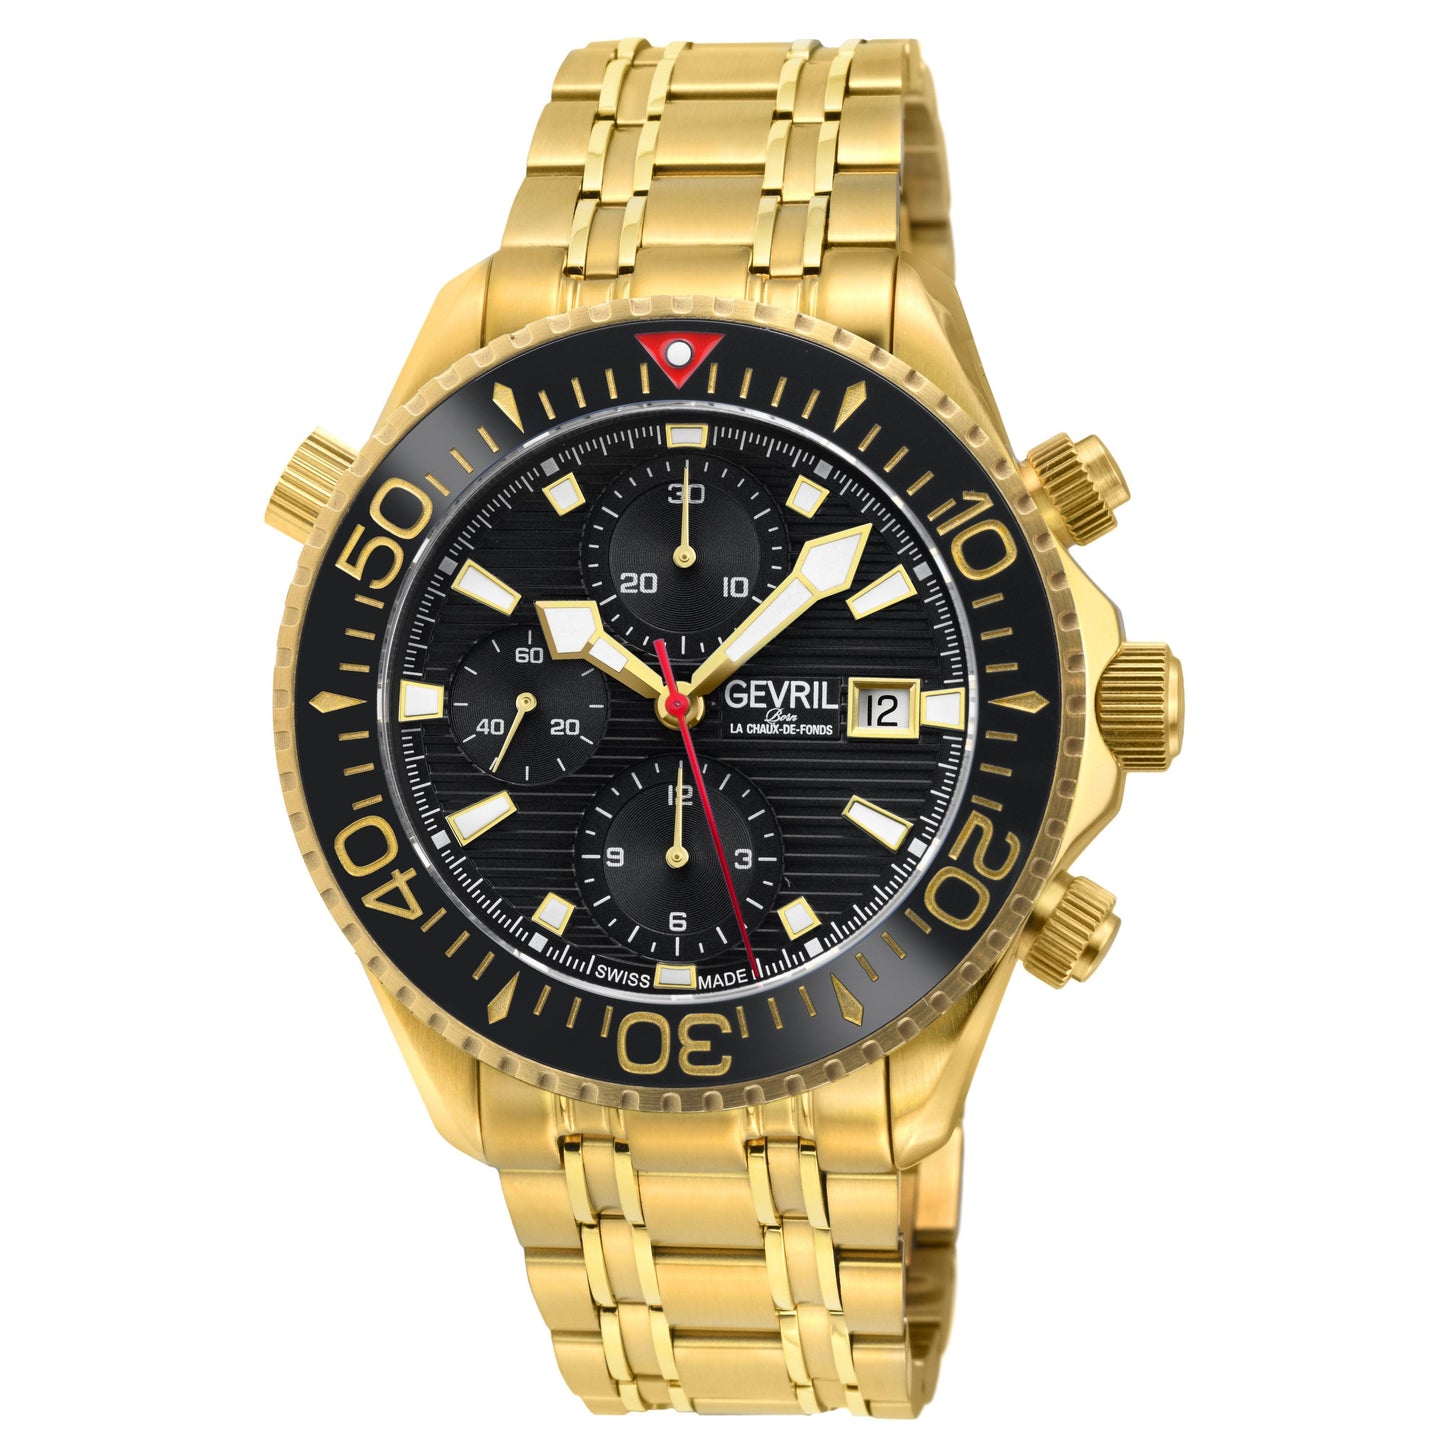 Gevril-Luxury-Swiss-Watches-Gevril Hudson Yards Chronograph - Diver-48811B